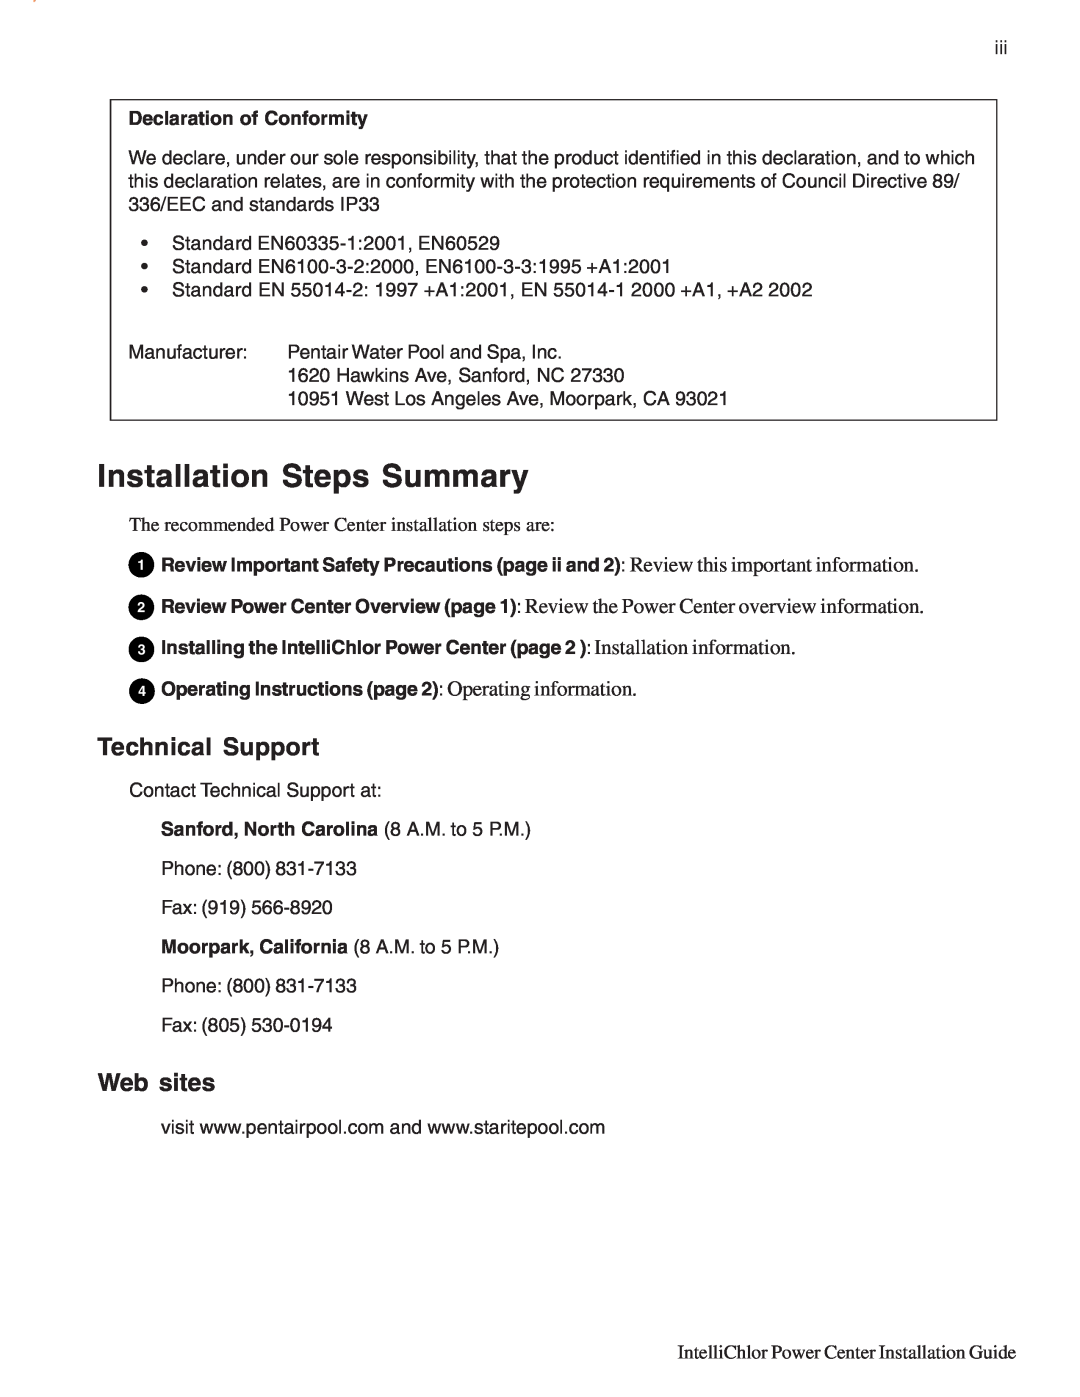 Pentair C20 Technical Support, Web sites, Declaration of Conformity, Operating Instructions page 2 Operating information 